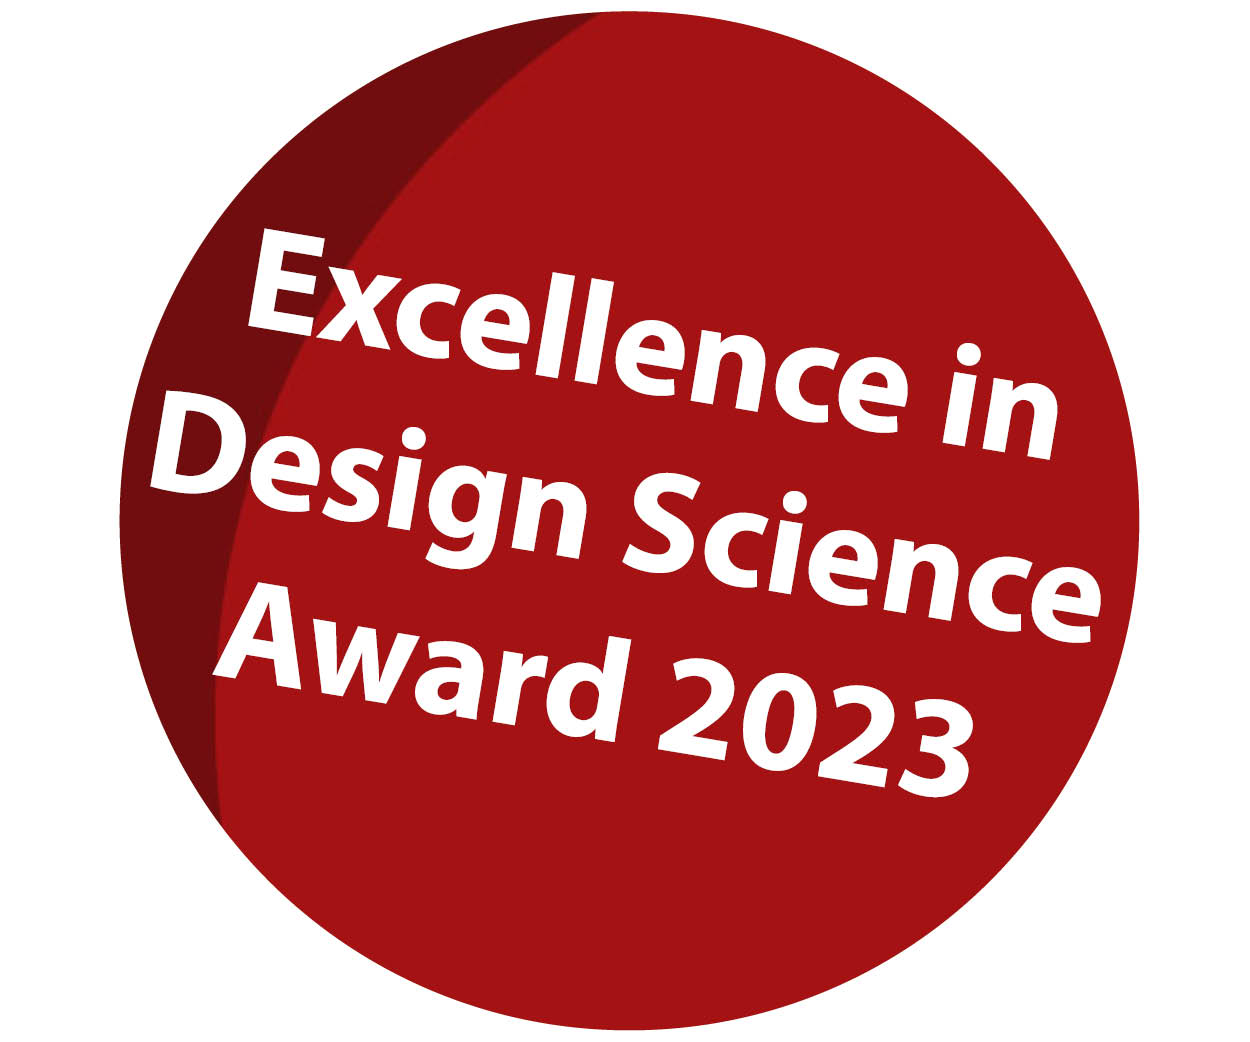 Excellence in Design Science Award 2023